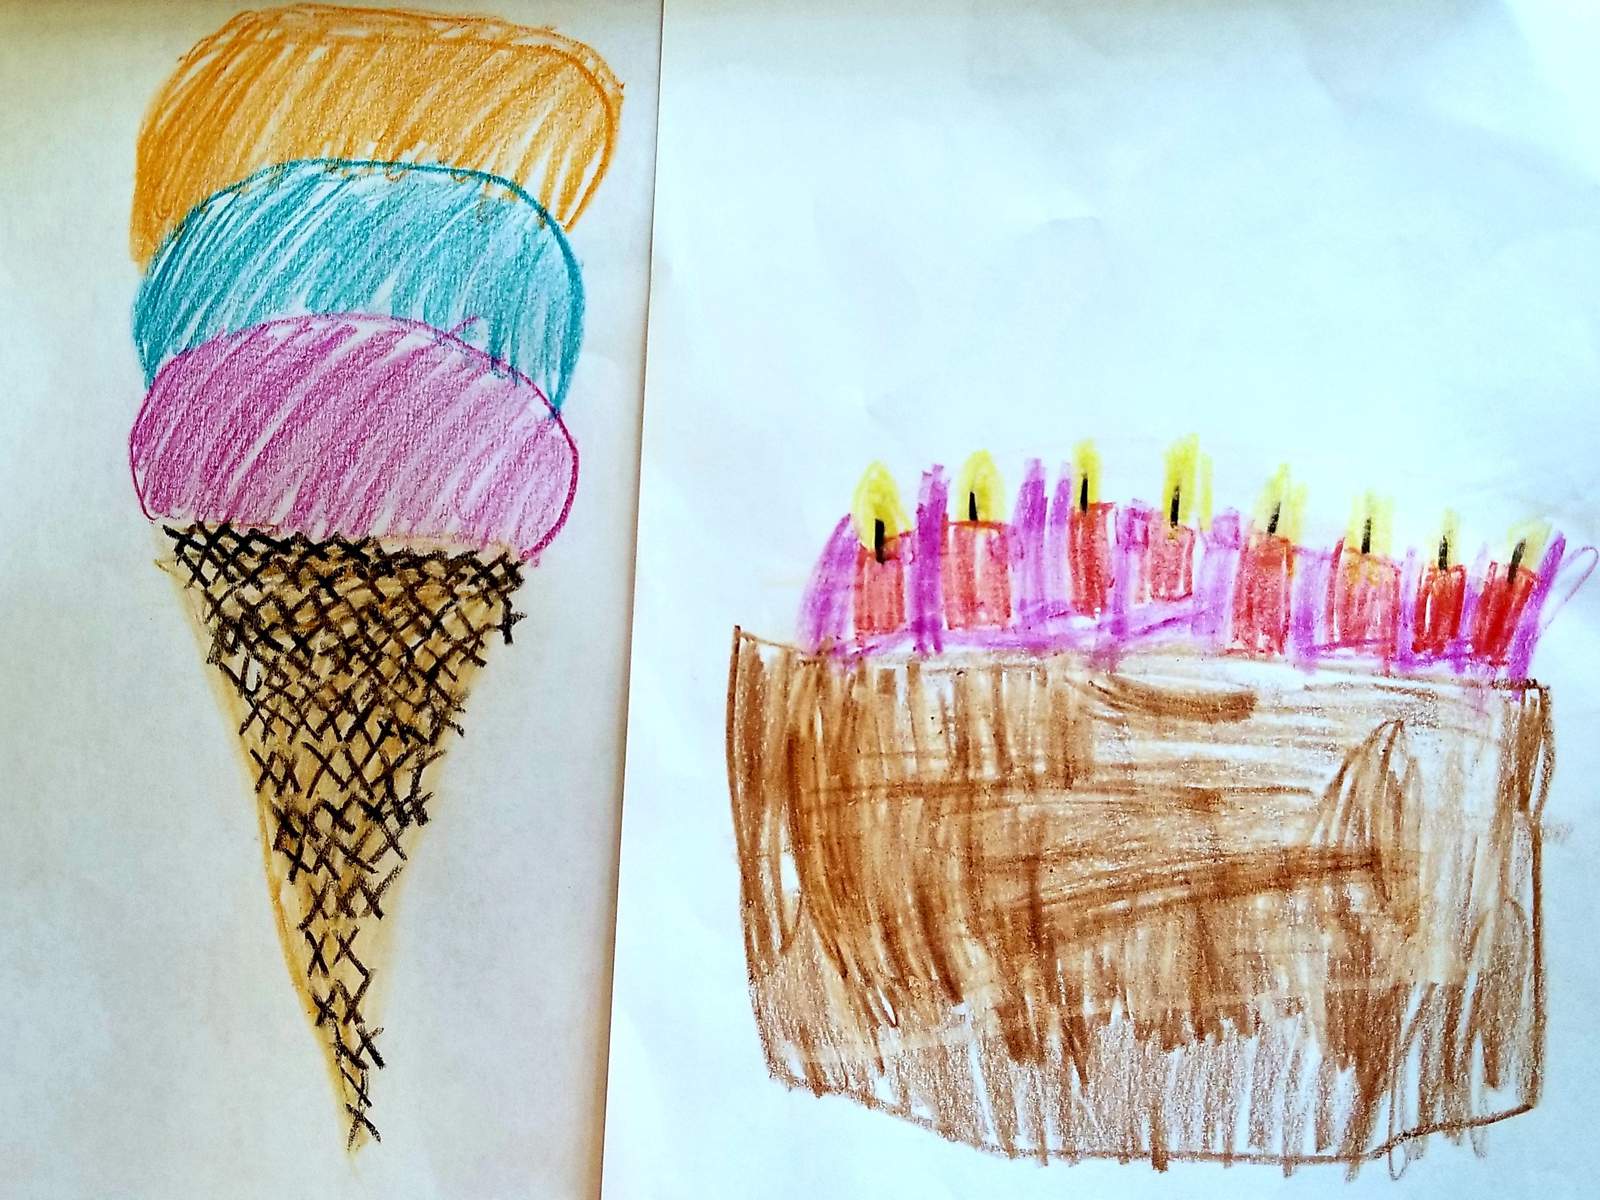 See 145 drawings of sweet treats Houston kids sent us as part of our Art Assignment